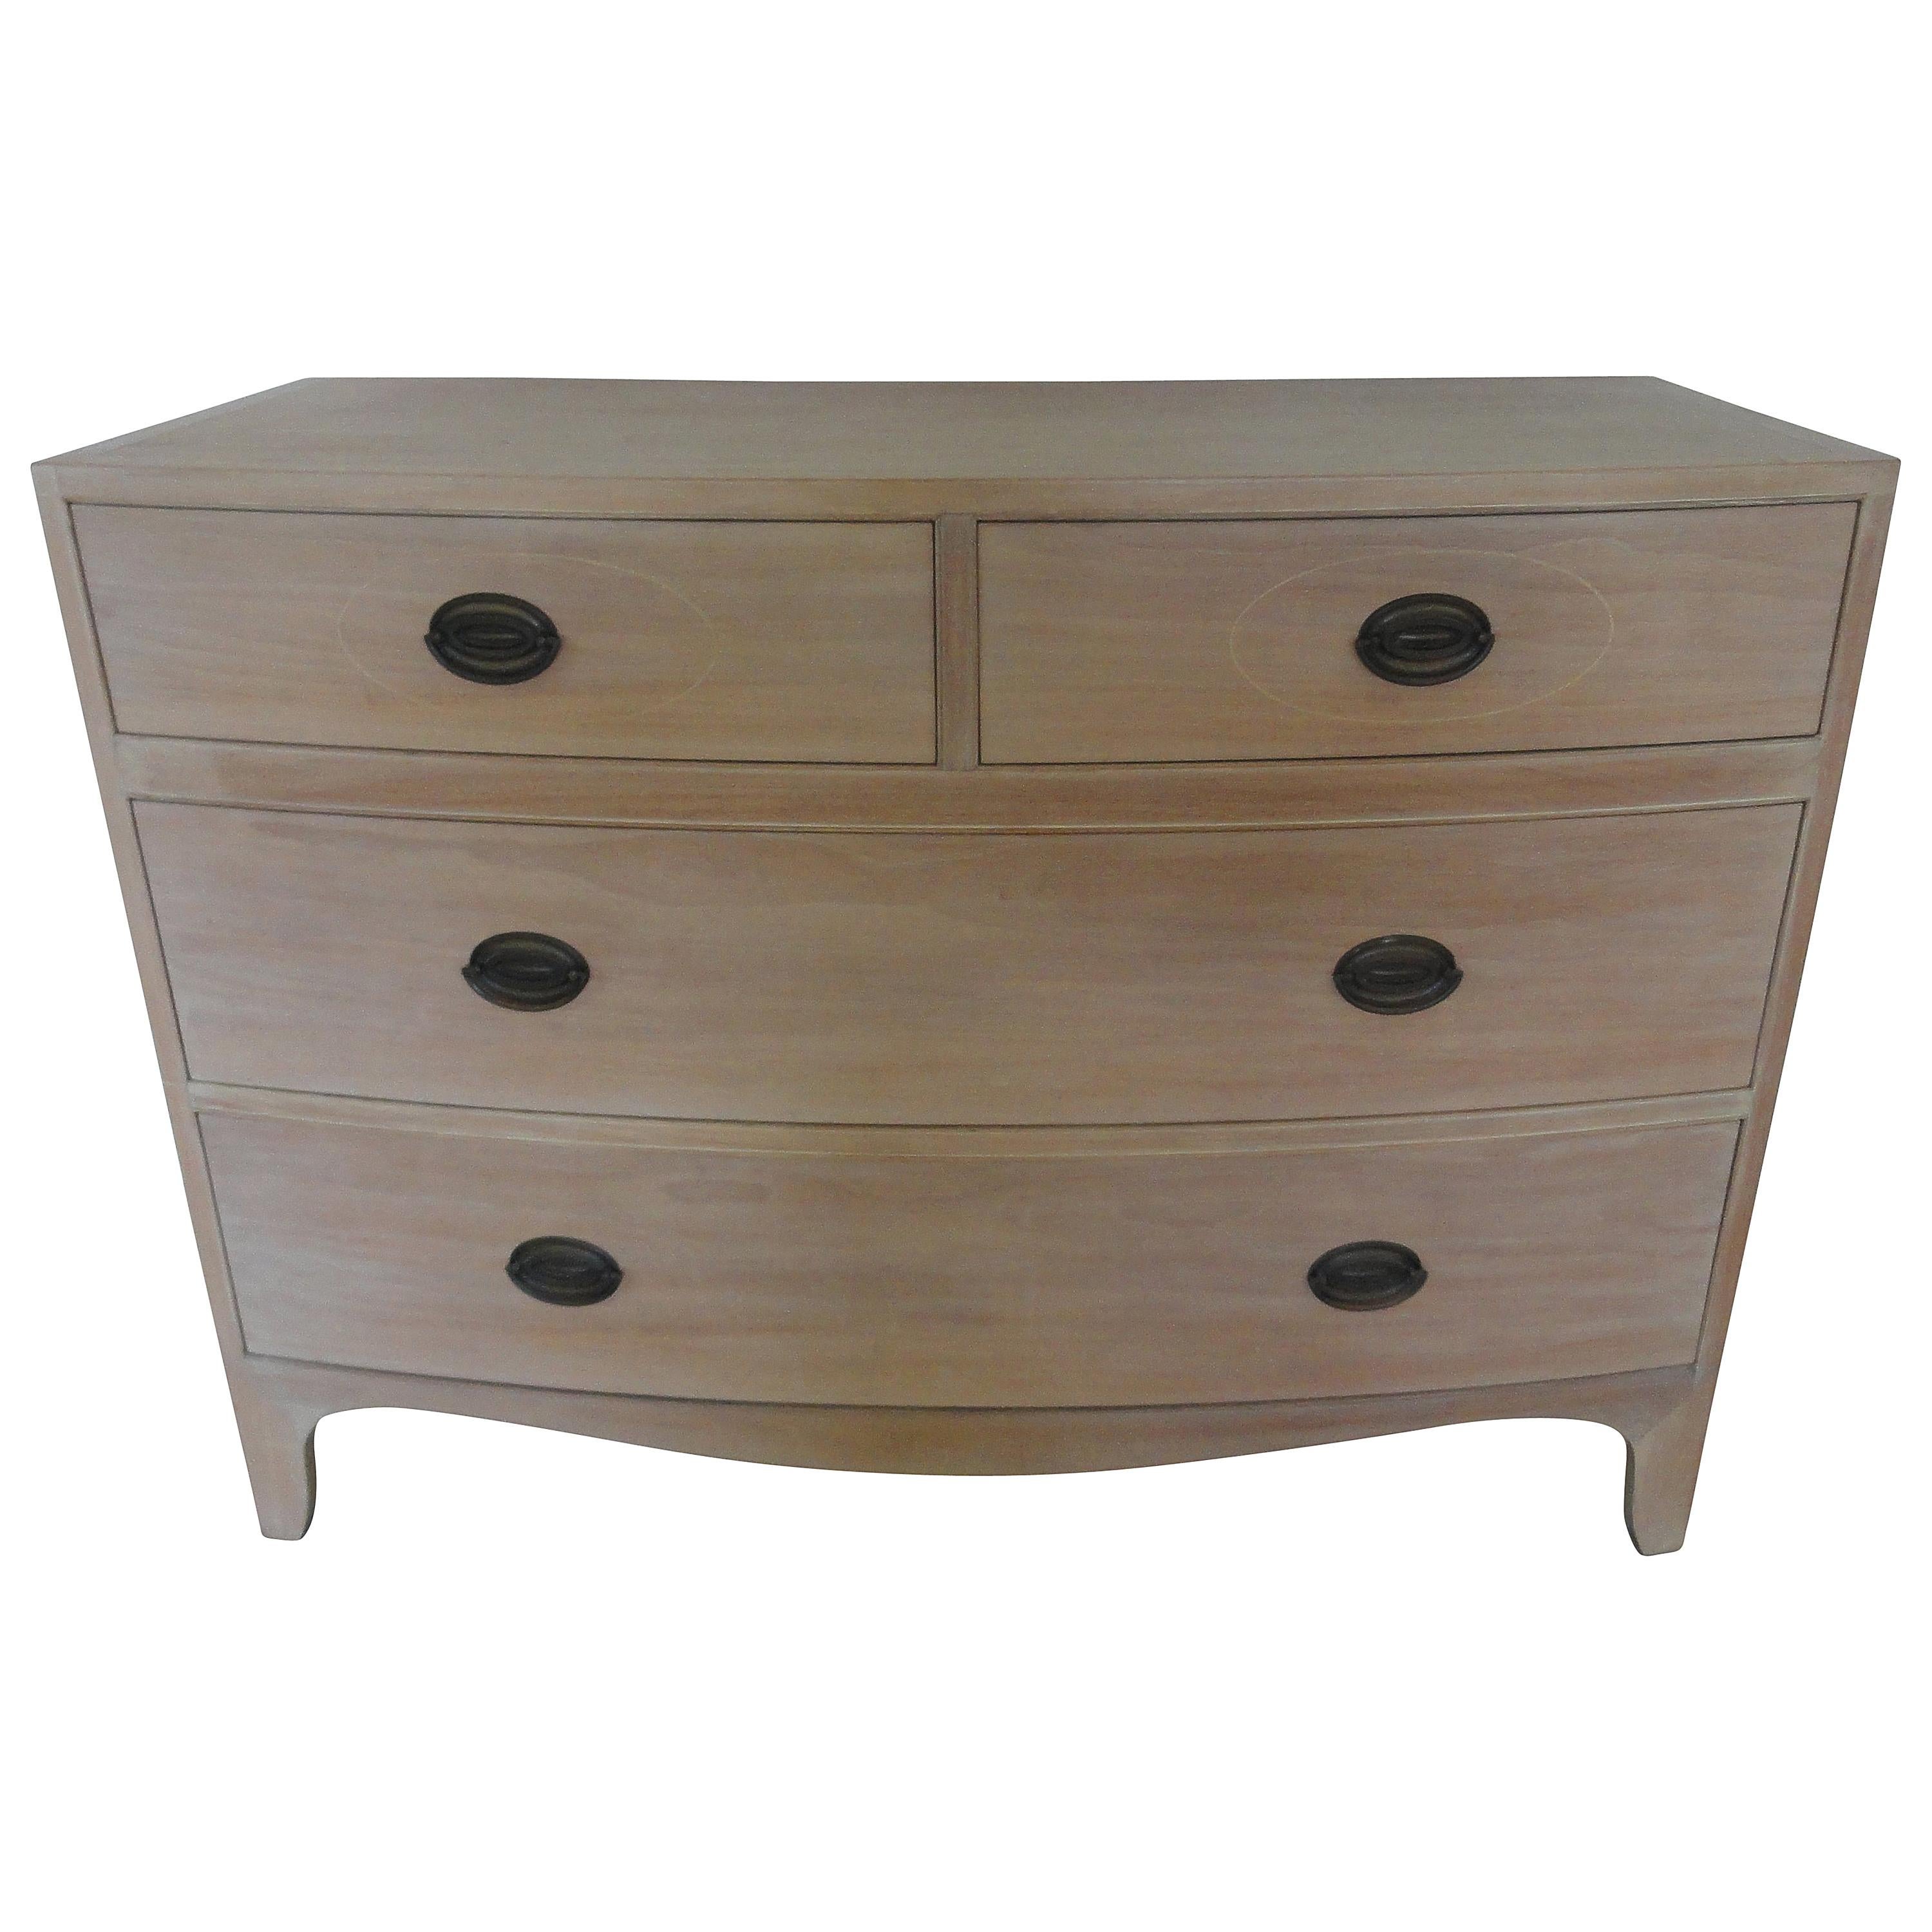 Vanleigh Furniture 4-Drawer Chest Of Drawers For Sale